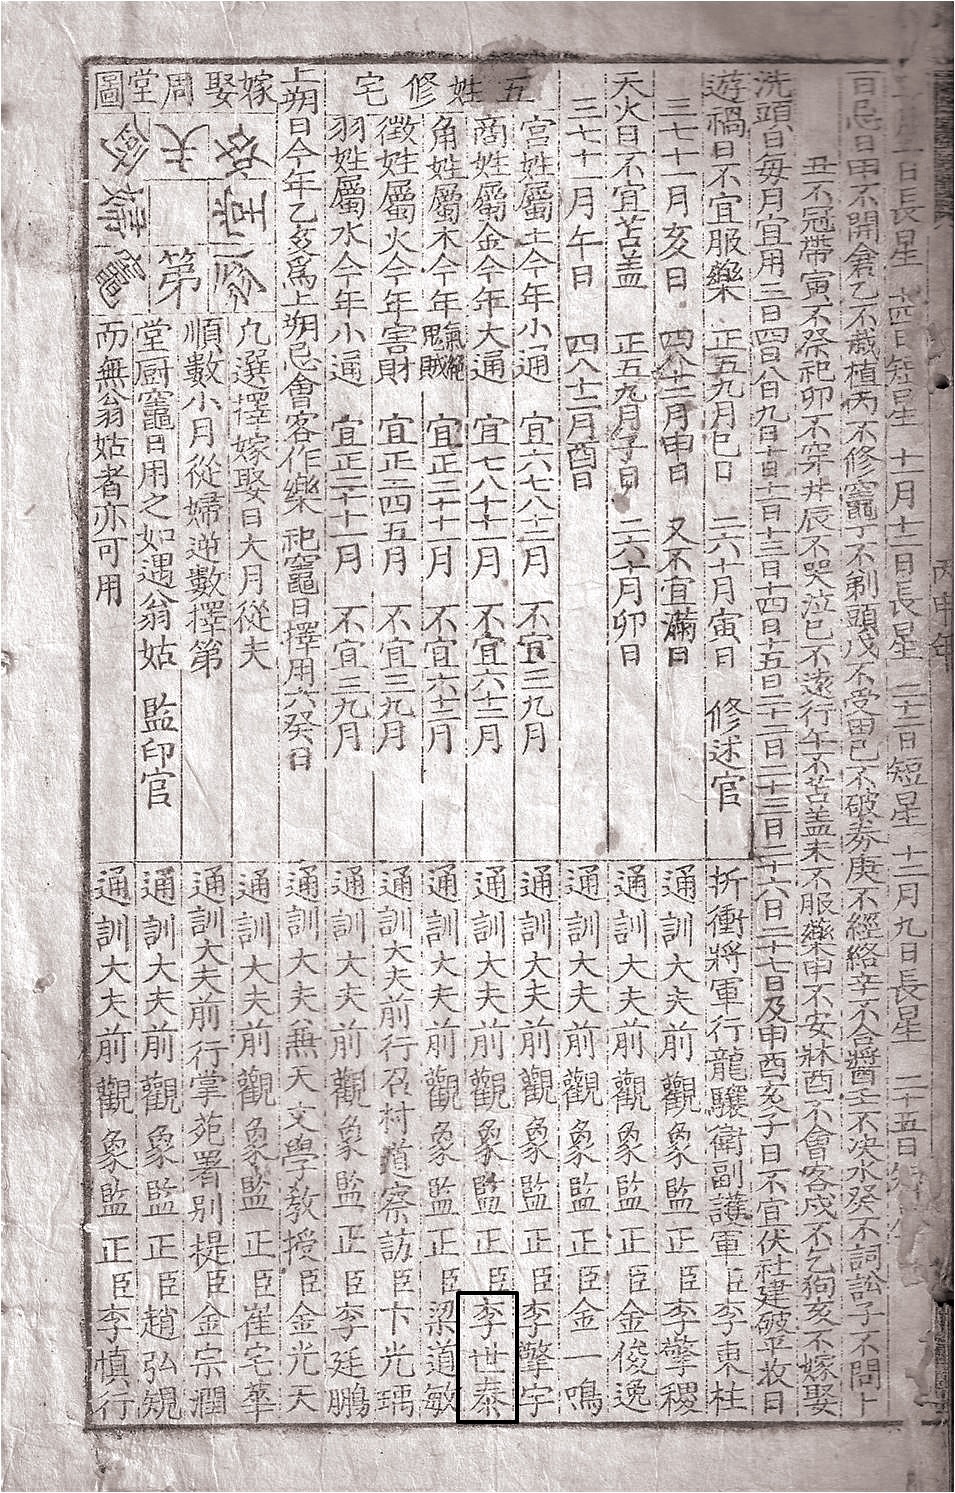 A total of fourteen names of calendar computers are listed in the last page of the Calendar of the 52nd reign year of King Yeongjo (1776), in which Yi Se-tae (李世泰)’s name is in the sixth from right (Adopted from Nha Il-Seong).